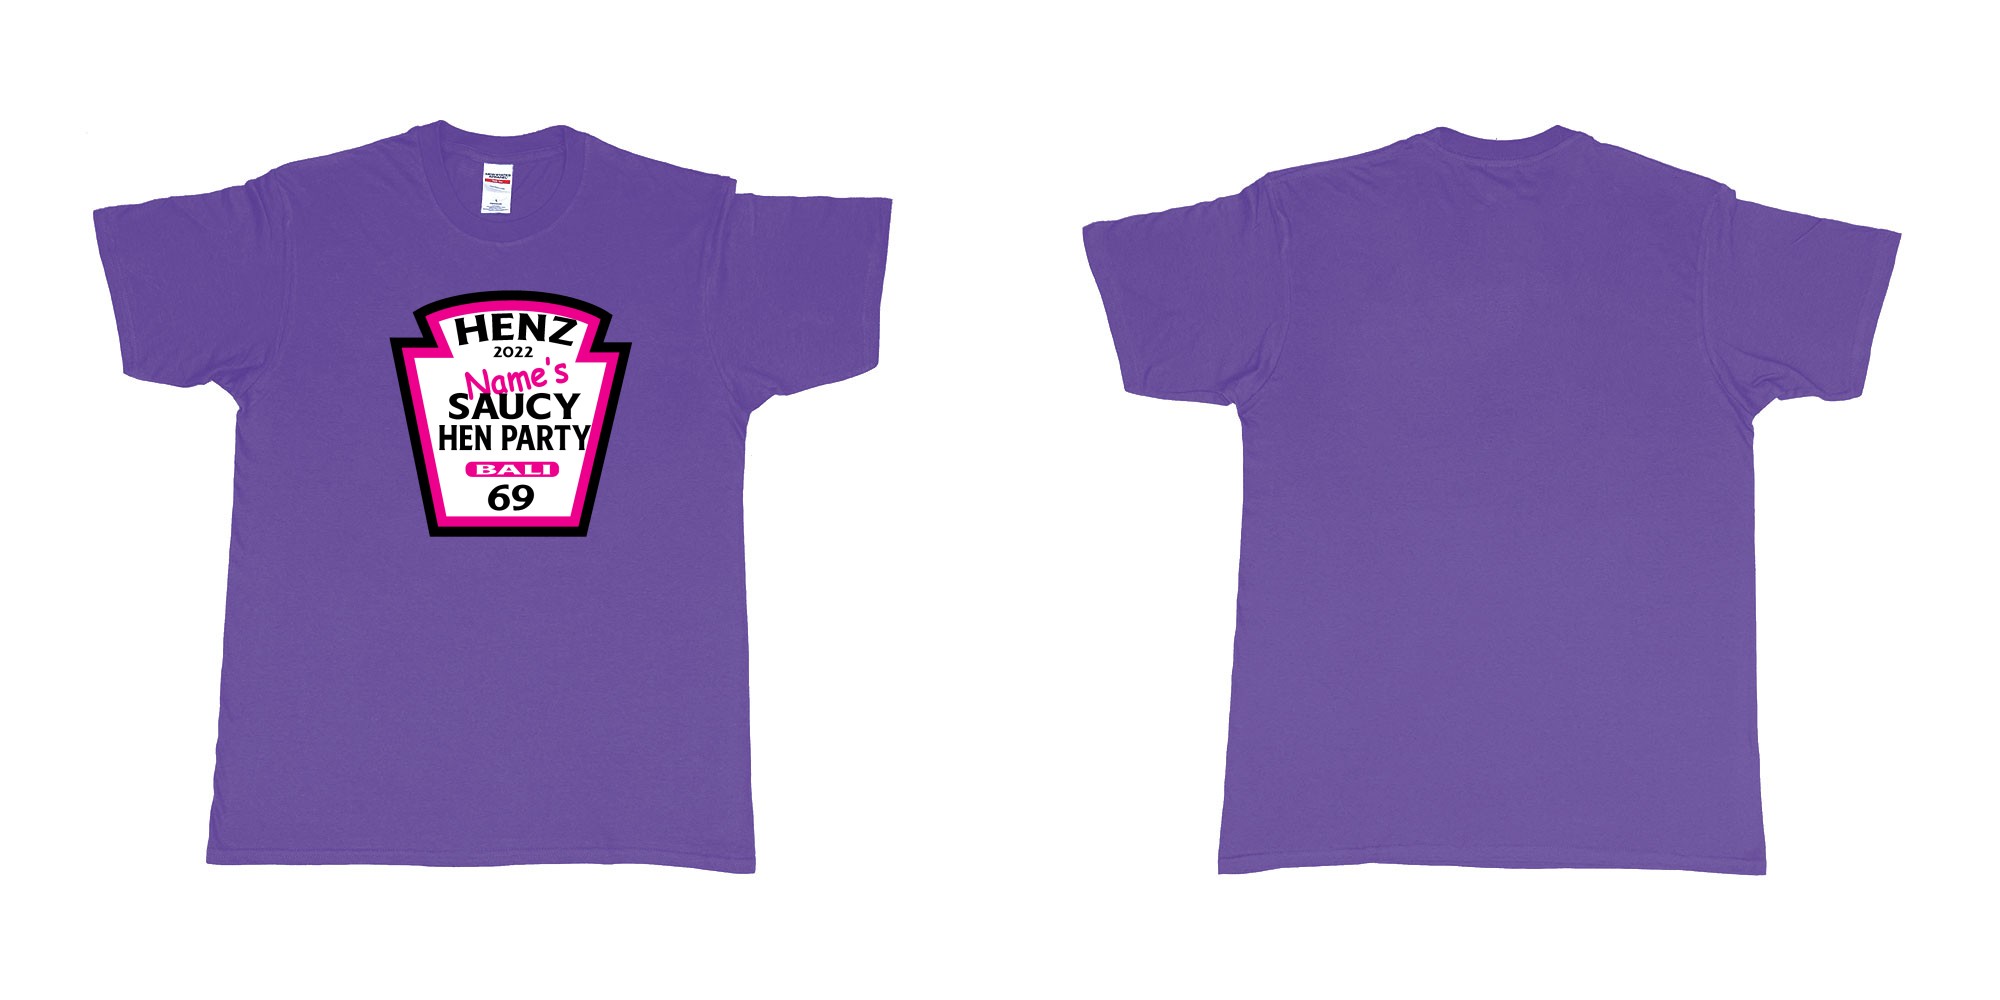 Custom tshirt design TPW Heinz ketchup hen night in fabric color purple choice your own text made in Bali by The Pirate Way